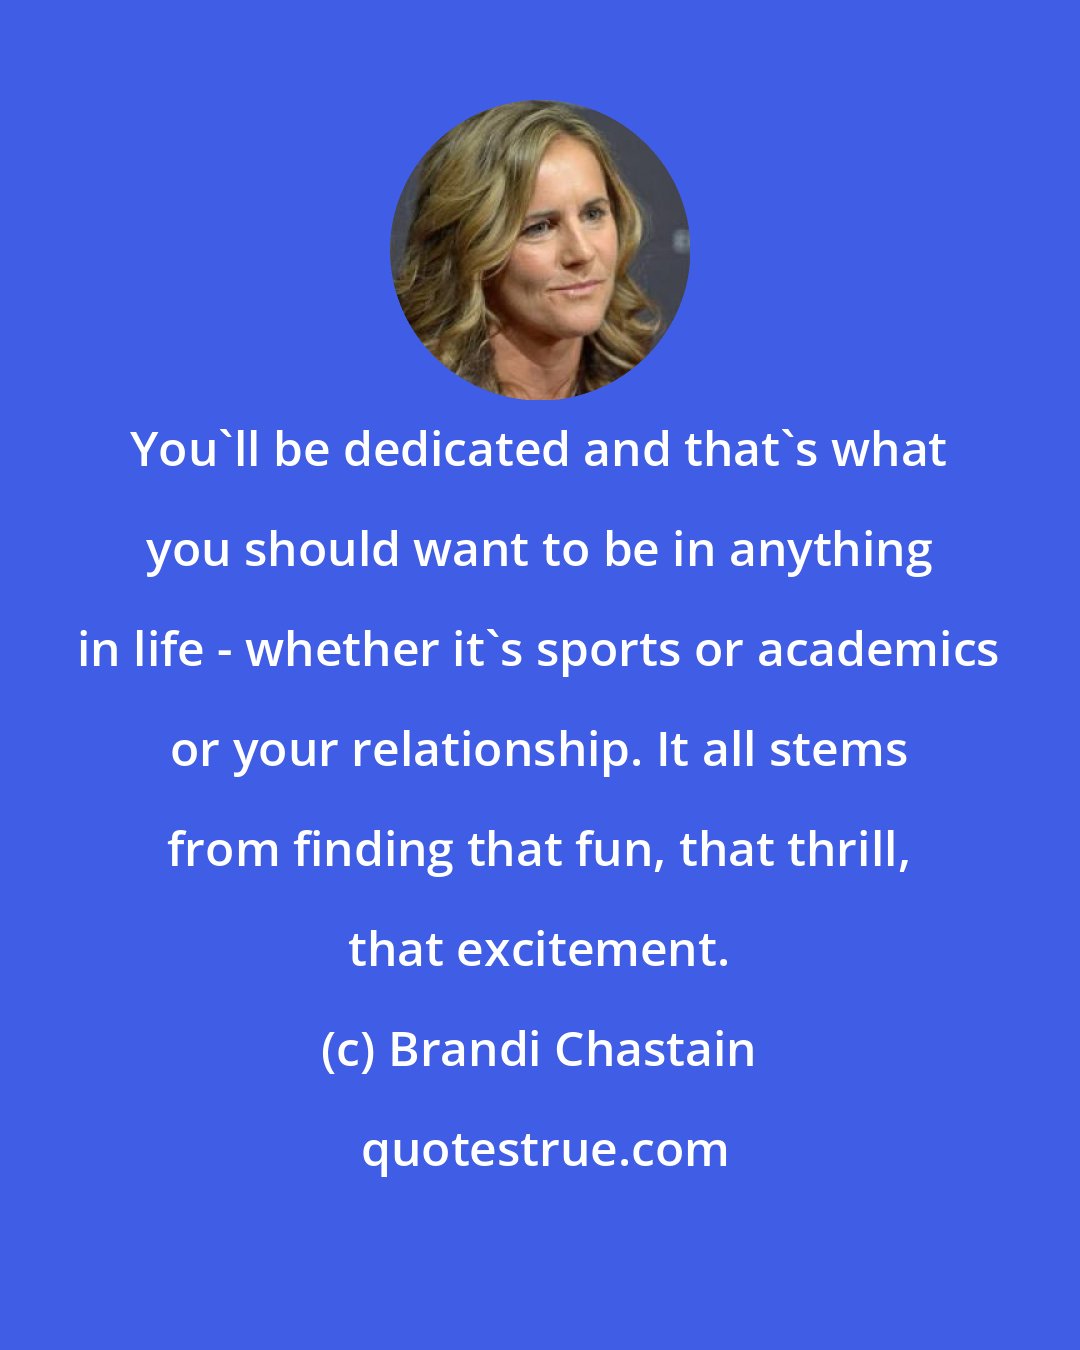 Brandi Chastain: You'll be dedicated and that's what you should want to be in anything in life - whether it's sports or academics or your relationship. It all stems from finding that fun, that thrill, that excitement.